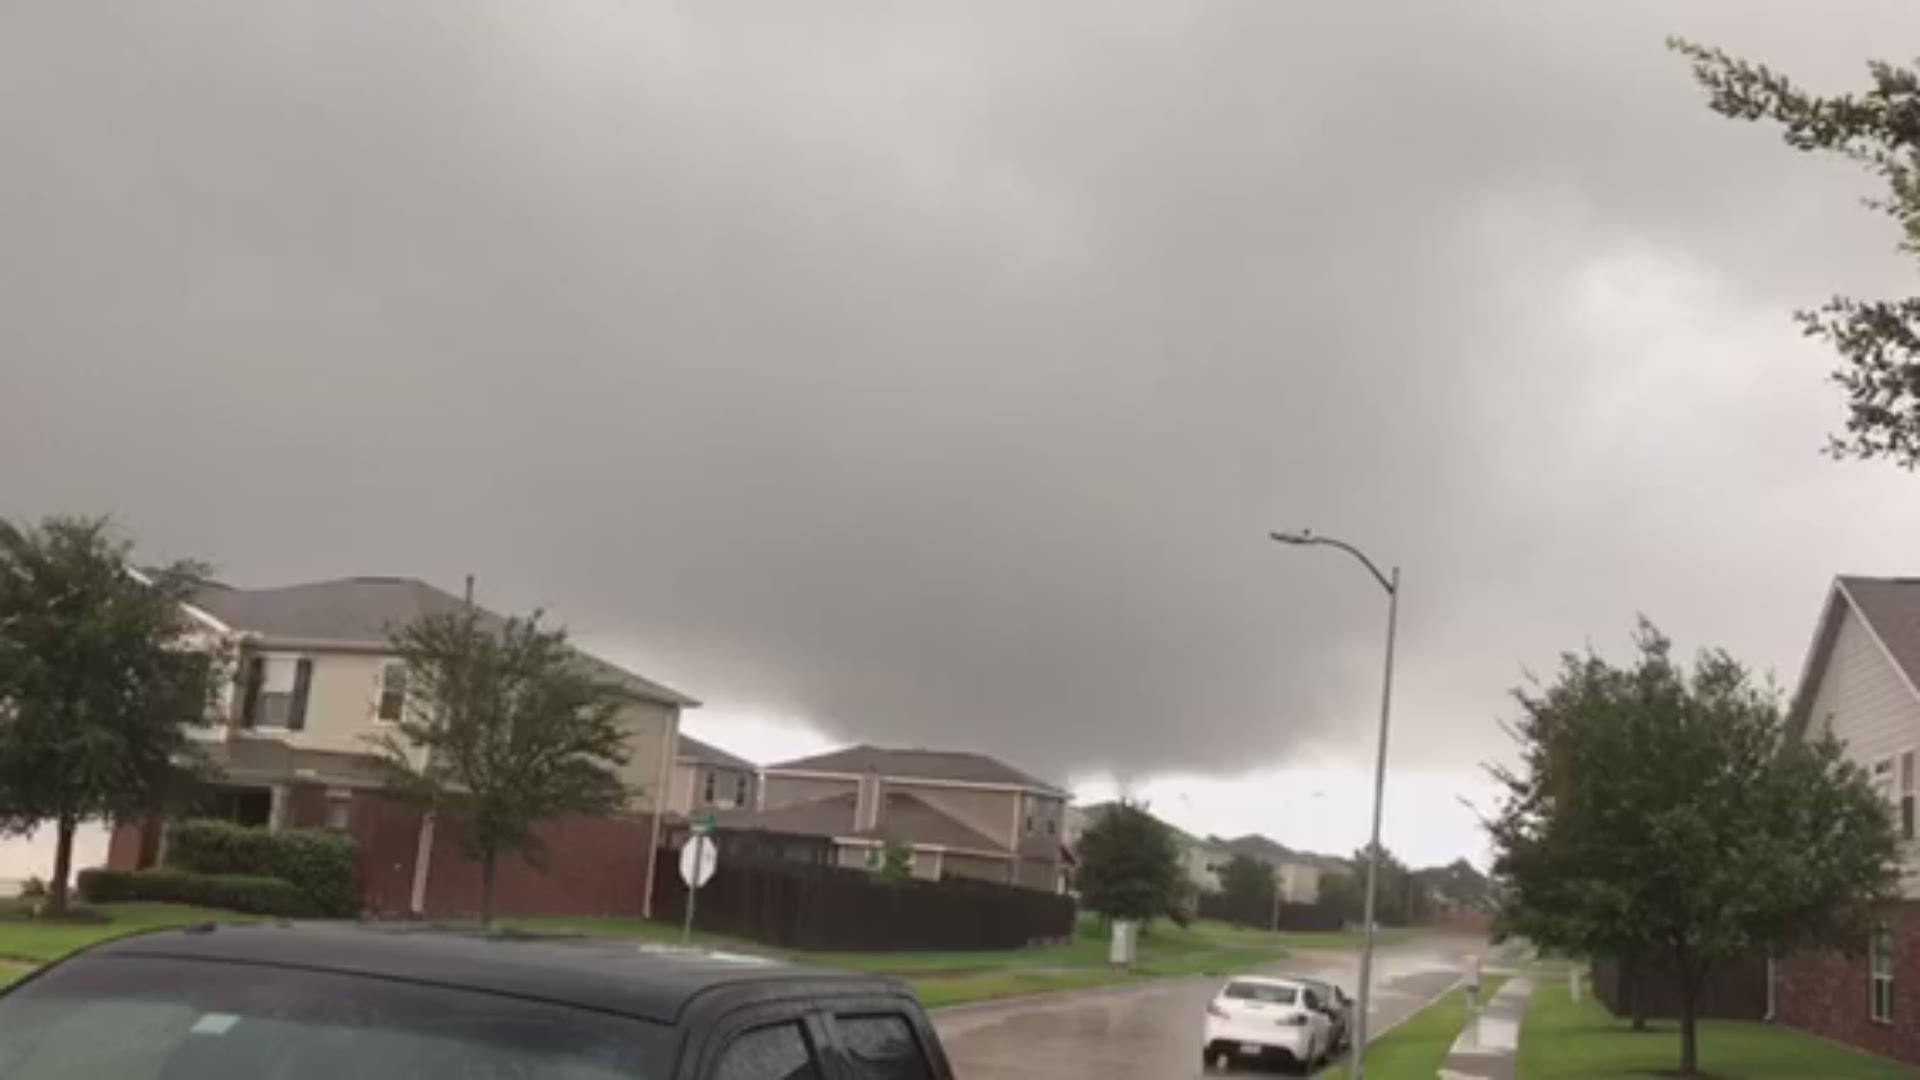 A KHOU 11 viewer shared video of a tornado that touched down near Barker Cypress and Longenbough in northwest Harris County Saturday afternoon.